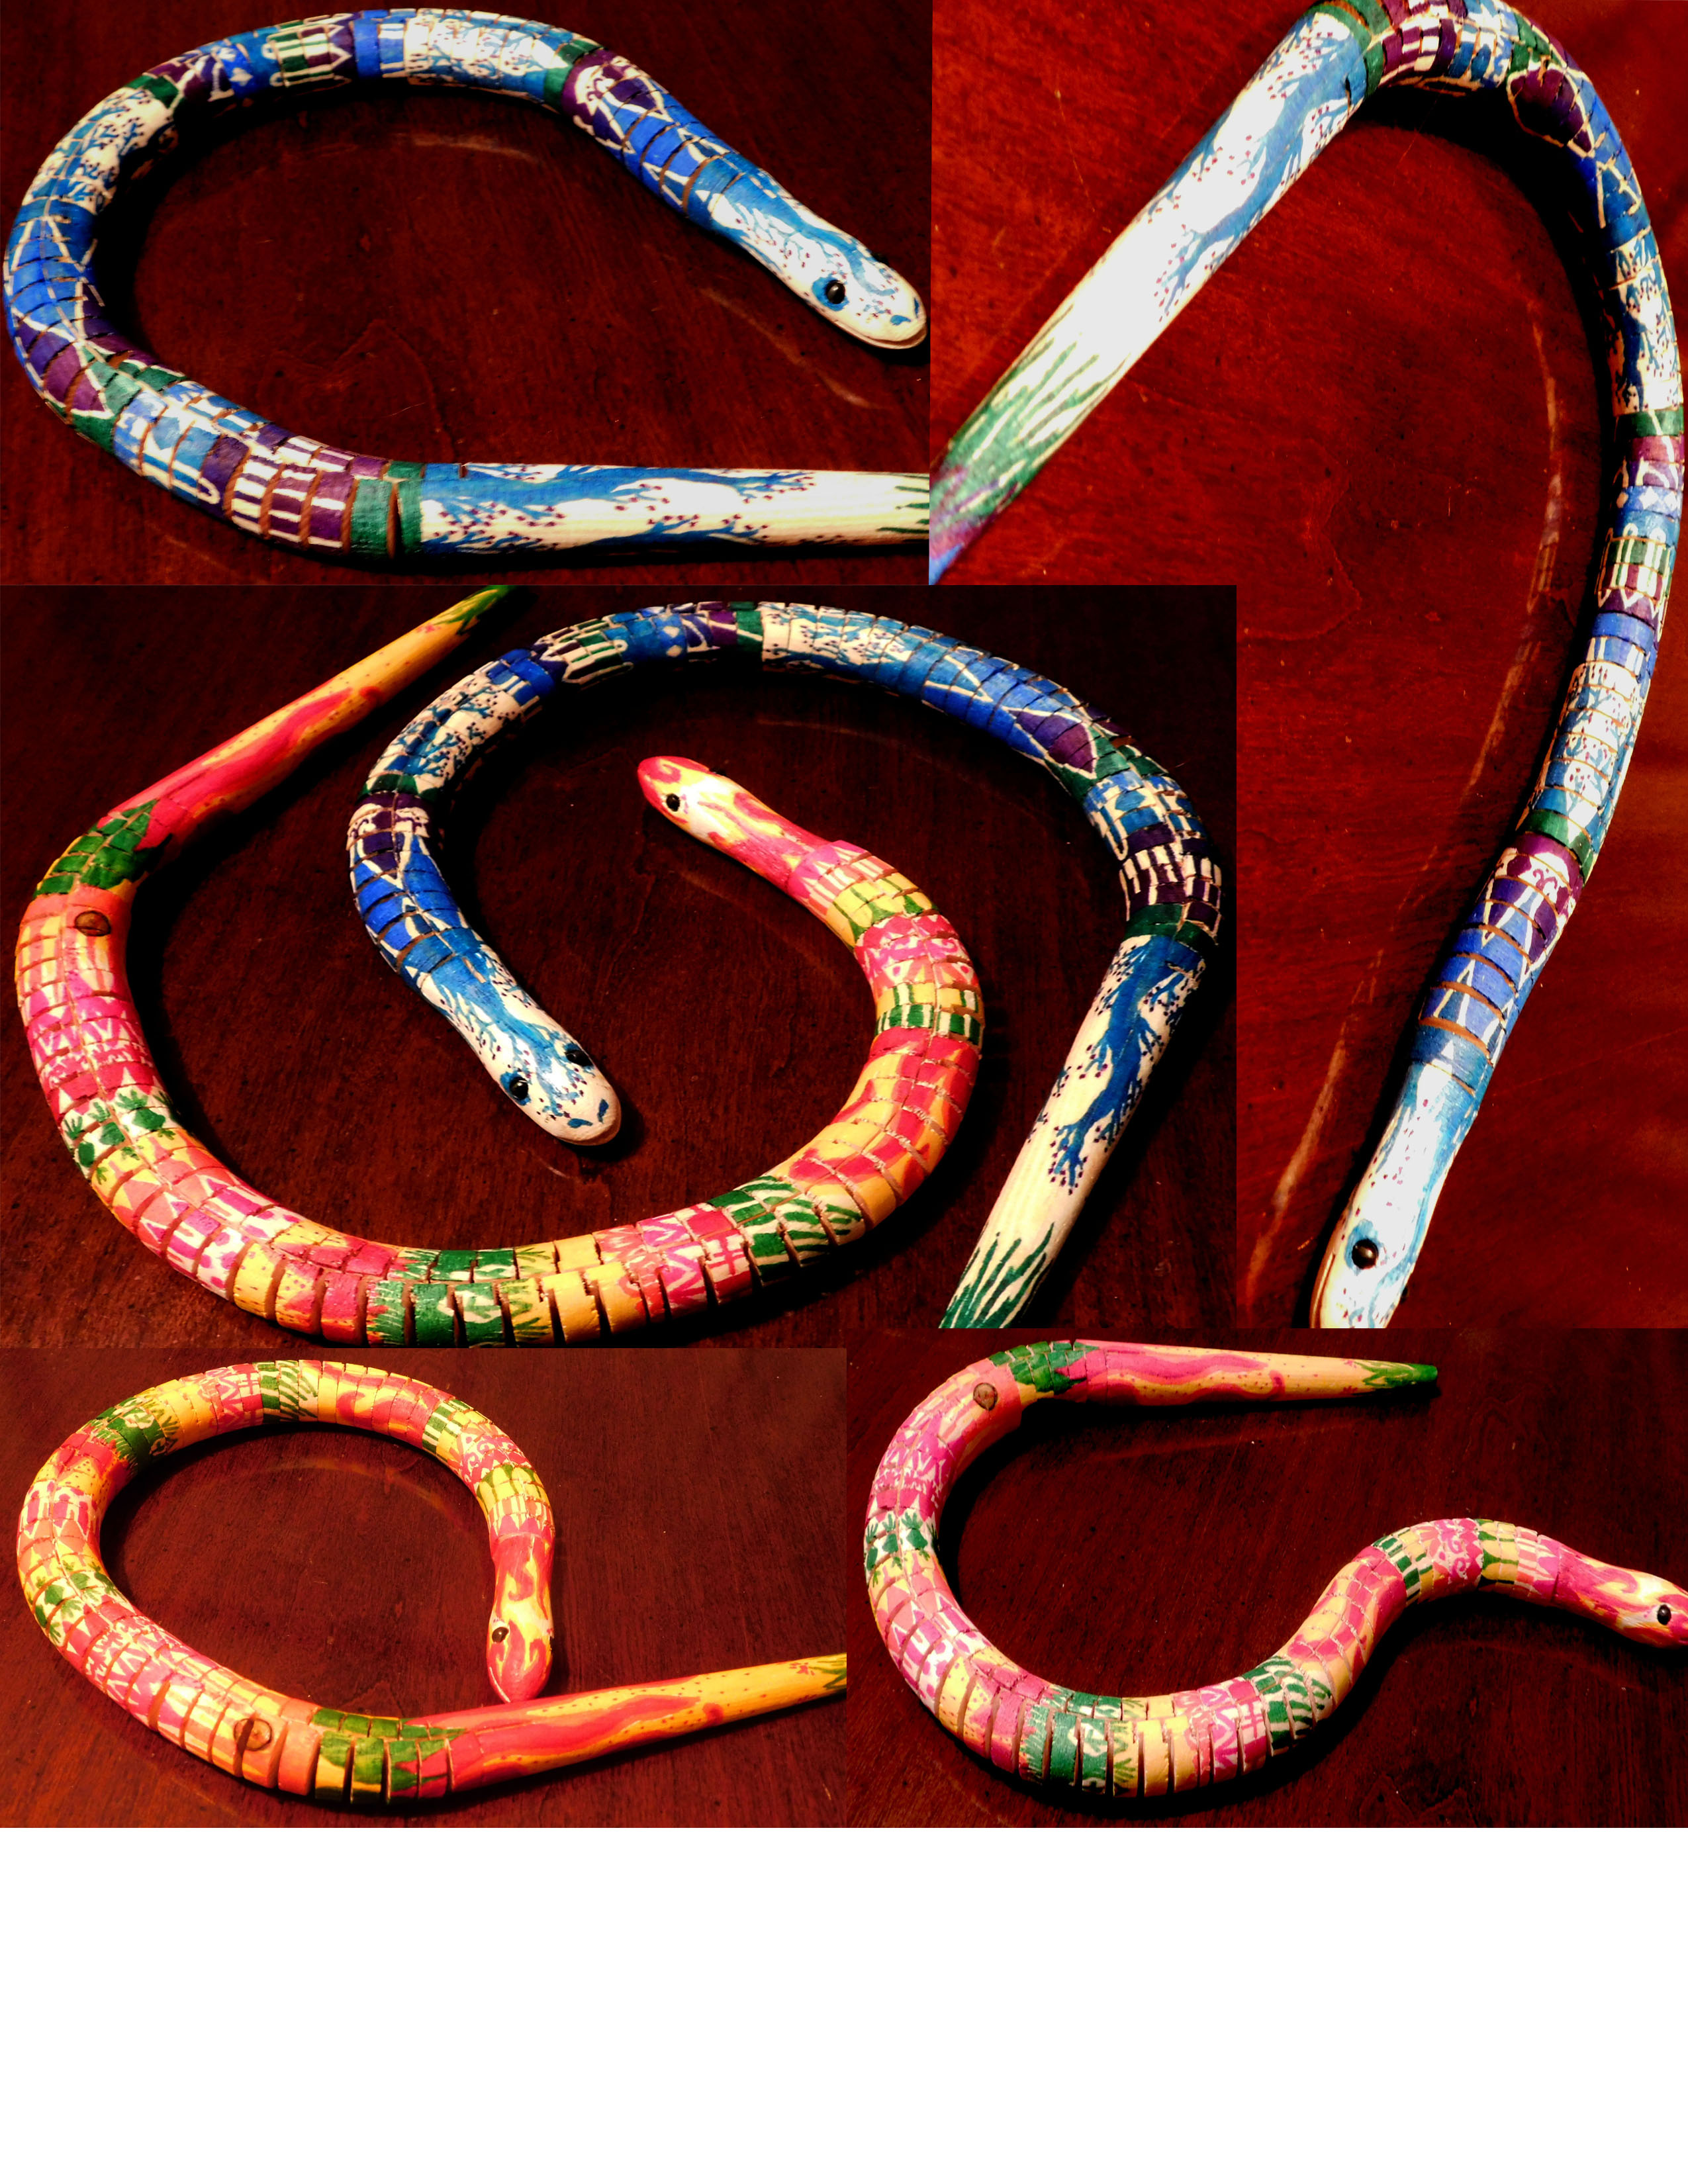 This Colorful Hand Painted Wooden Snake - One of a kind - Reticulated is made with love by The Creative Soul Sisters! Shop more unique gift ideas today with Spots Initiatives, the best way to support creators.